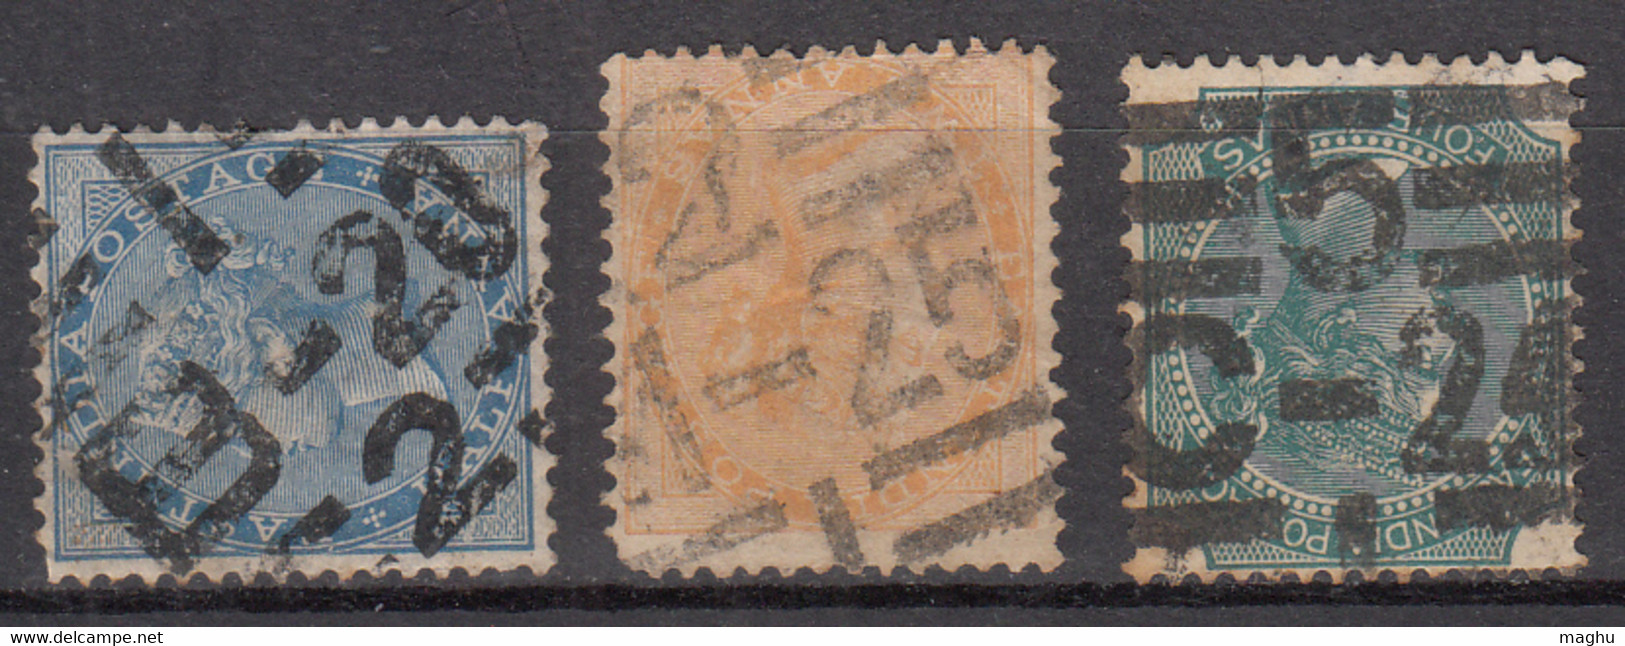 3 Diff., Cancellation Of  JC Type 32a / Martin 17b, QV British East India India Used, Early Indian Cancellation - 1854 Britse Indische Compagnie